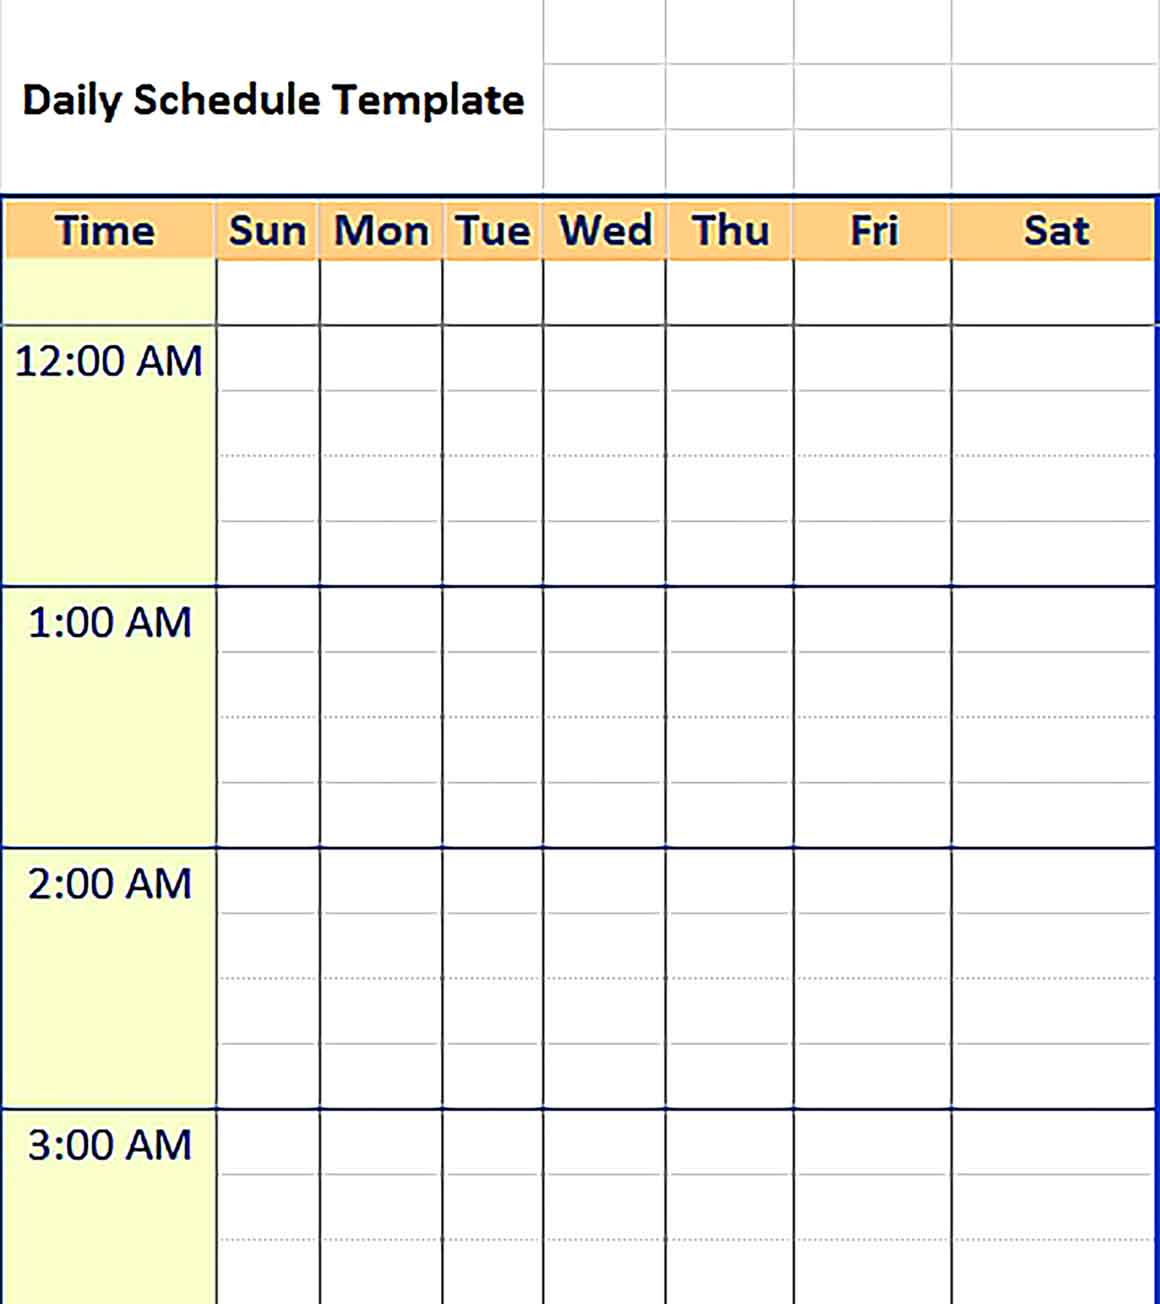 Template daily schedule Sample 003 Copy